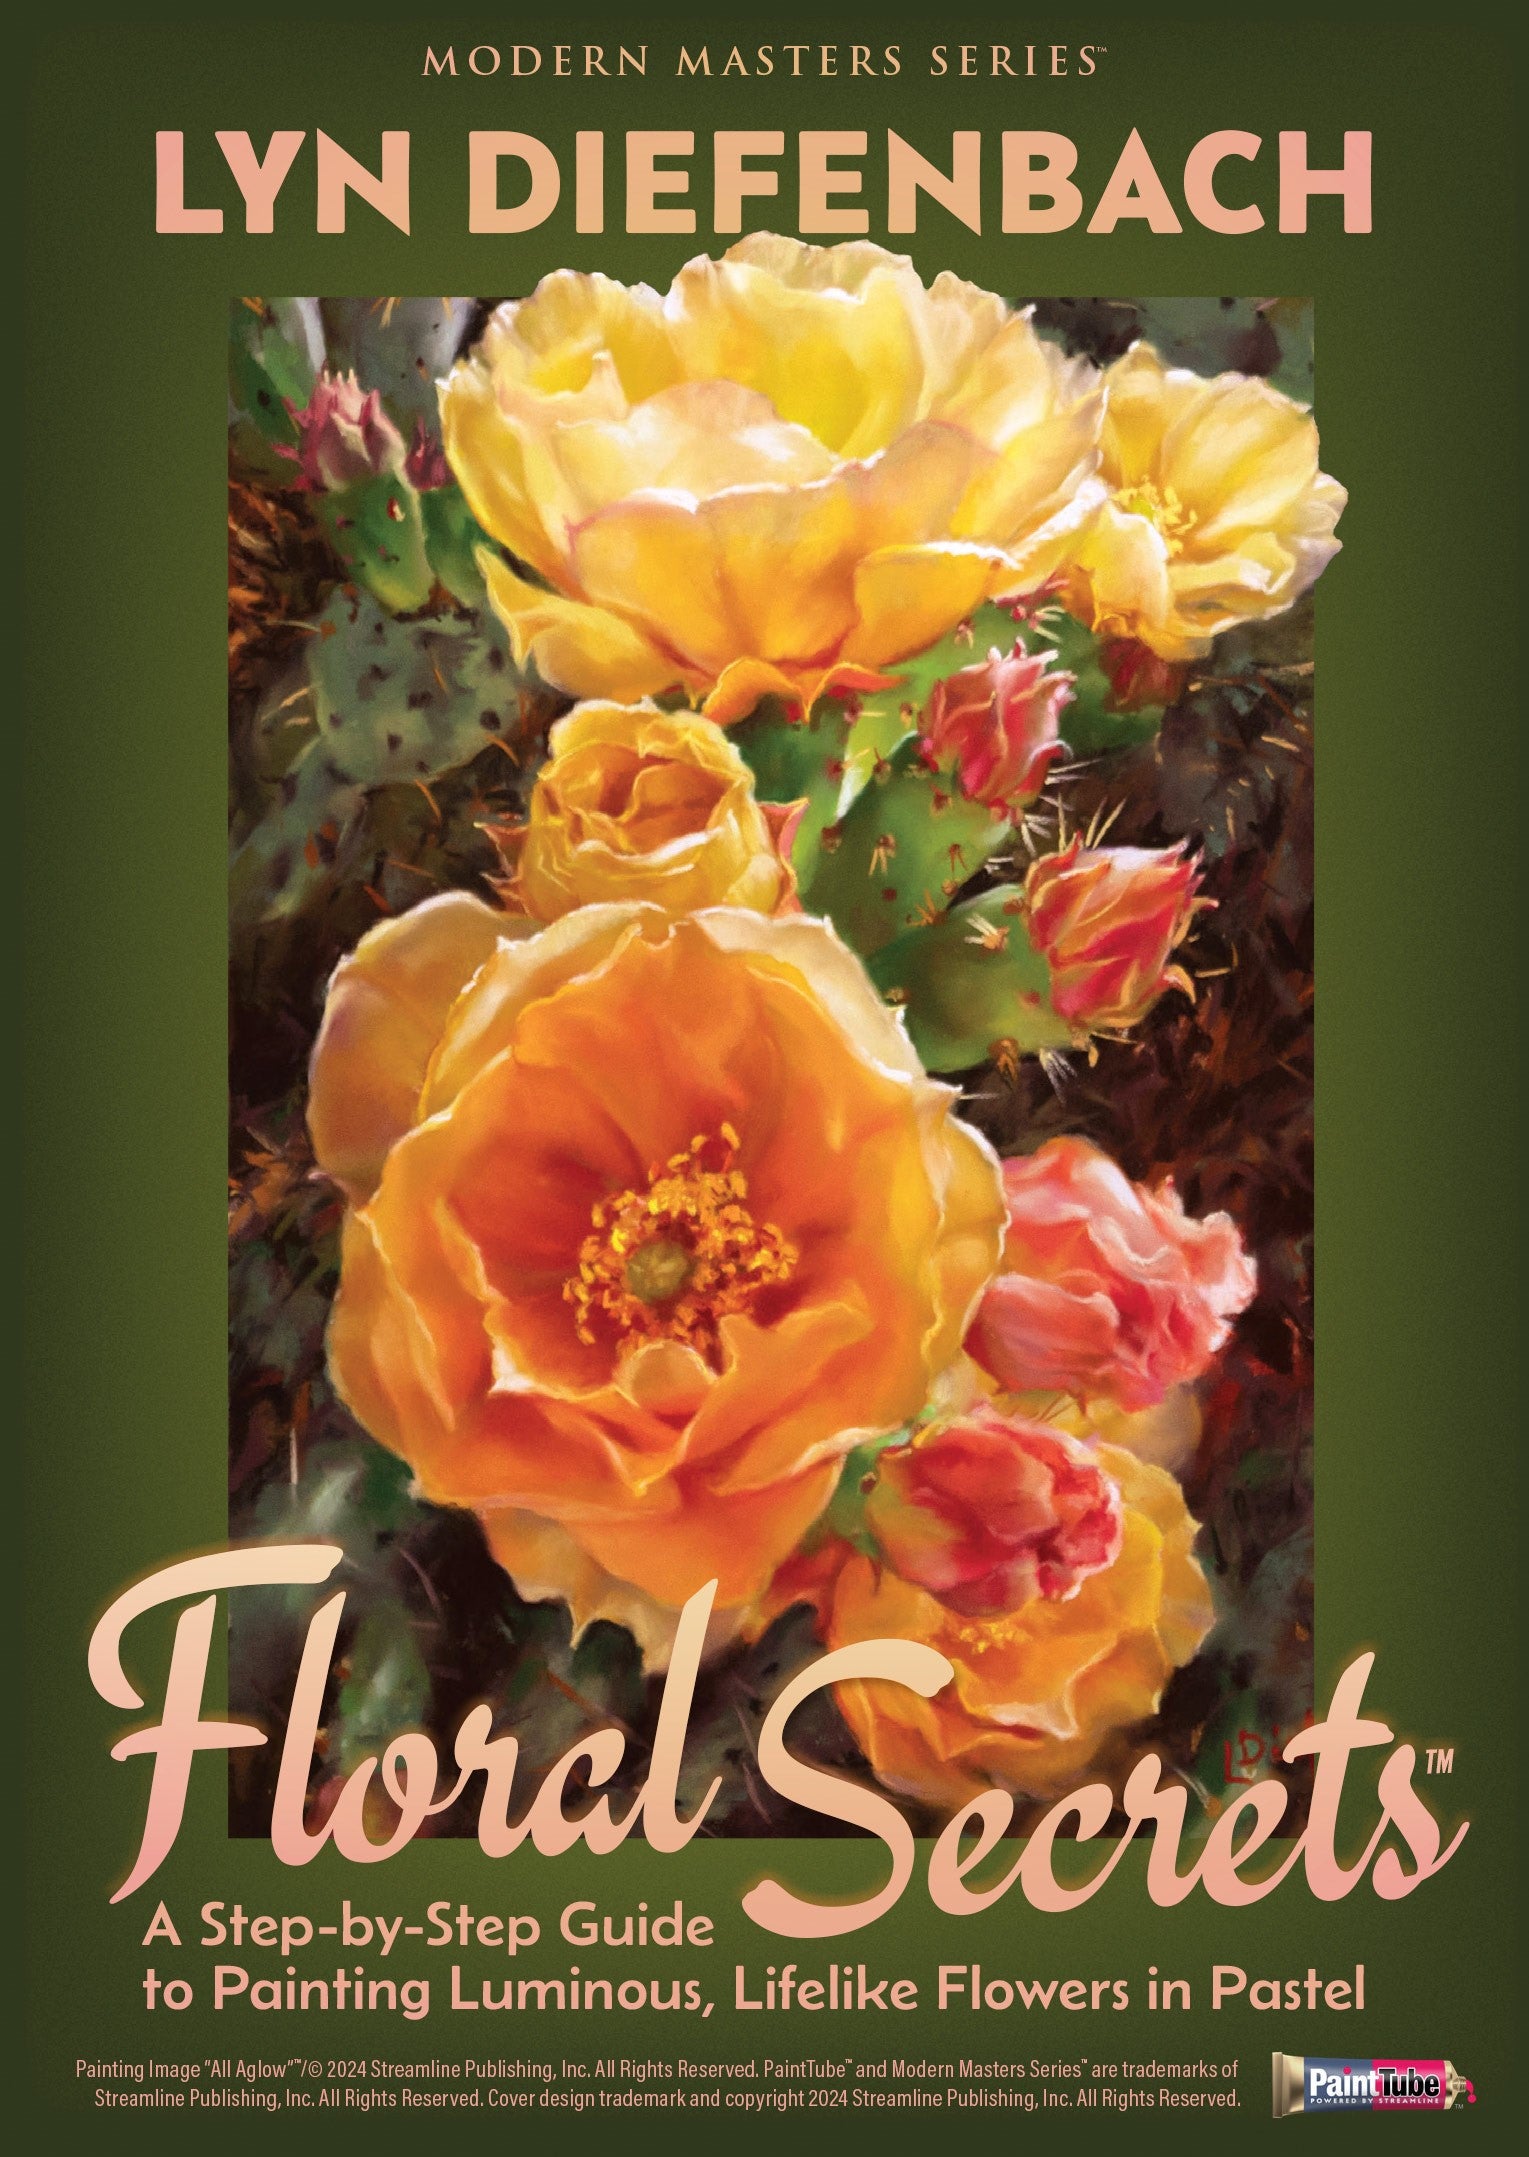 Lyn Diefenbach: Floral Secrets - A Step-by-Step Guide to Painting Luminous, Lifelike Flowers in Pastel (PRE-RELEASE)